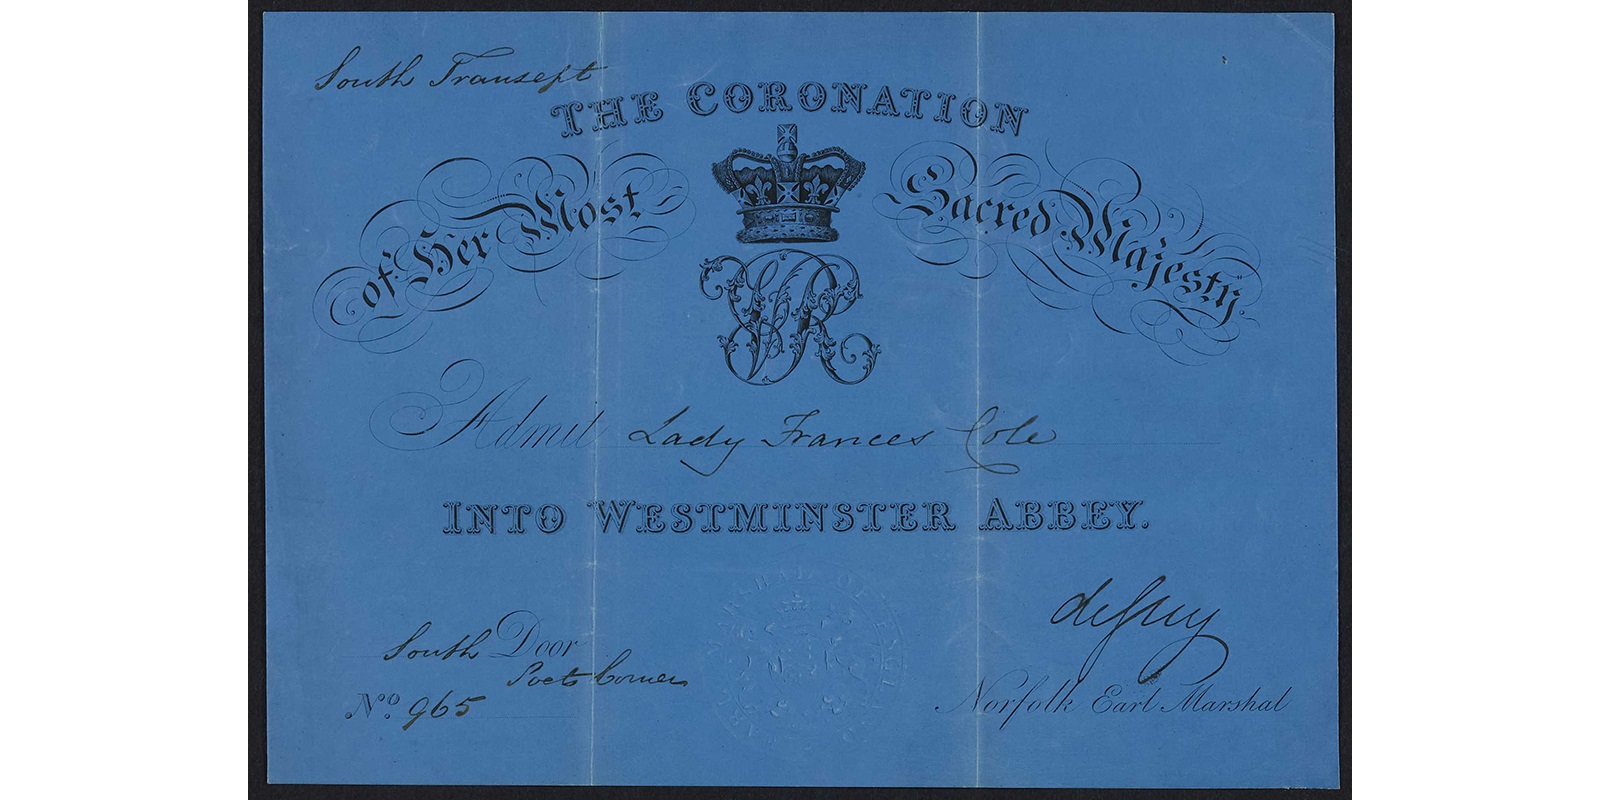 Ticket printed on blue card. The invitation text has been printed in ornate type, with the specific ticket details (such as seat number) written in a cursive hand. The crown insignia is centred, toward the top, with the initials ‘VR’ just below in large embellished capitals.